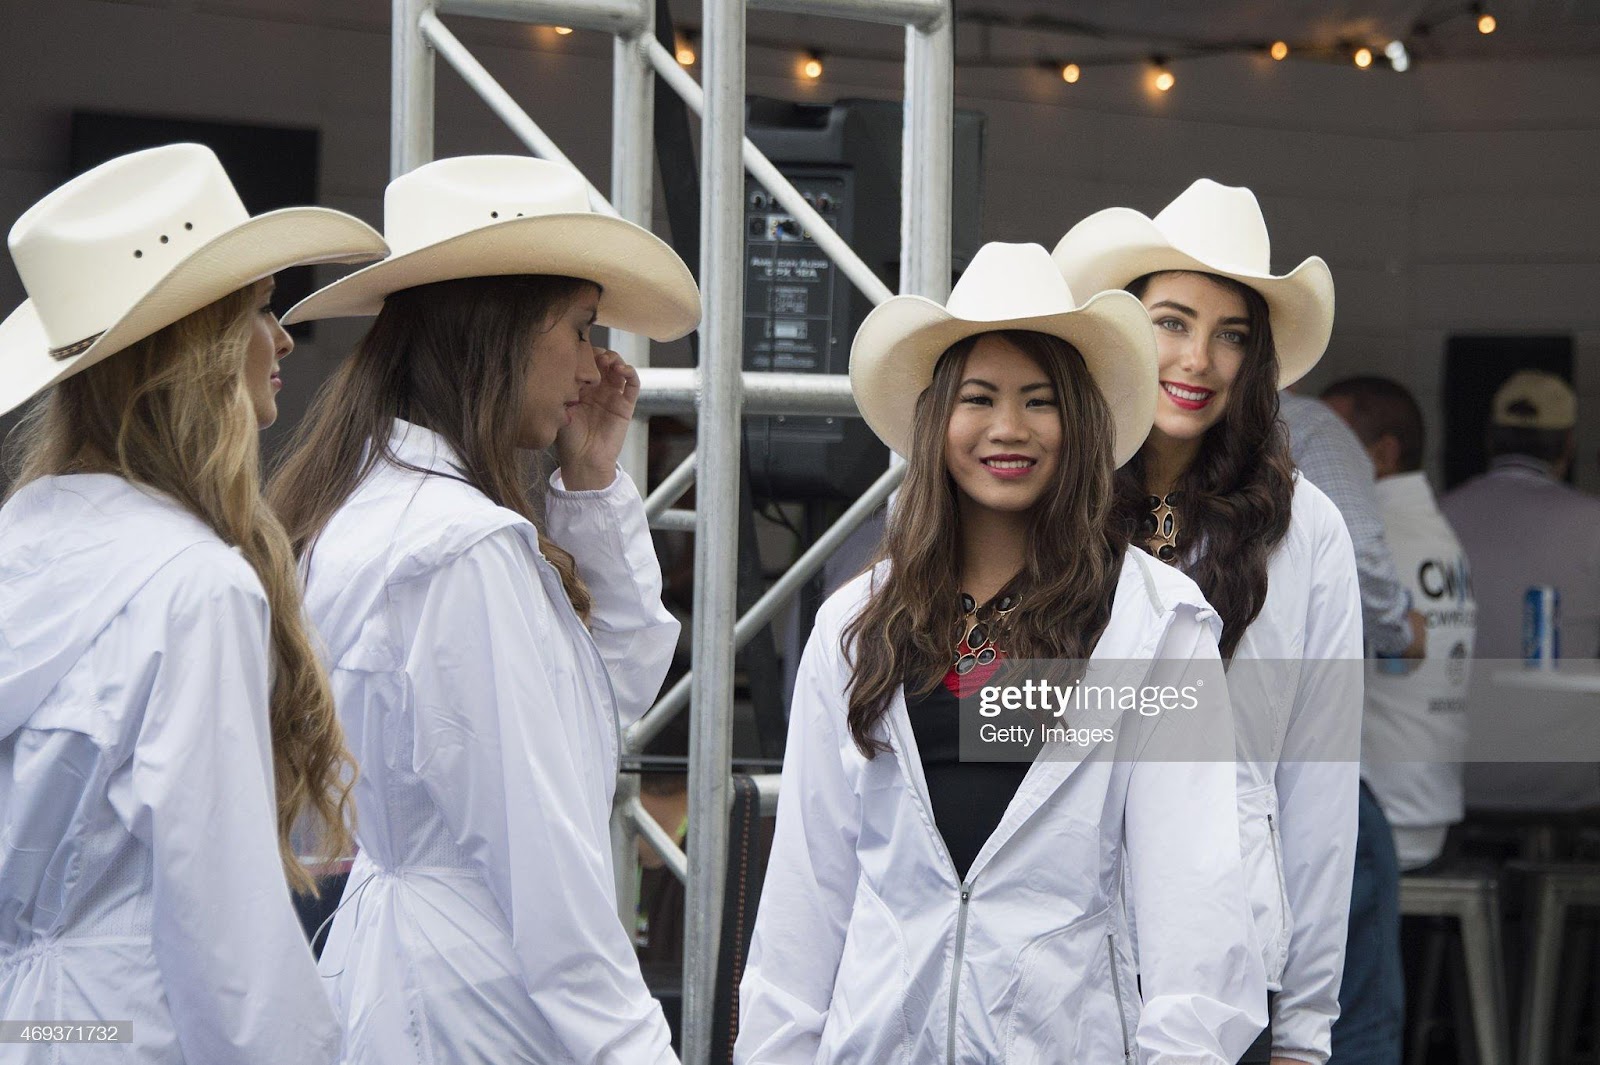 D:\Documenti\posts\posts\Women and motorsport\foto\Getty e altre\the-grid-girls-pose-in-paddock-during-the-motogp-red-bull-us-grand-picture-id469371732.jpg